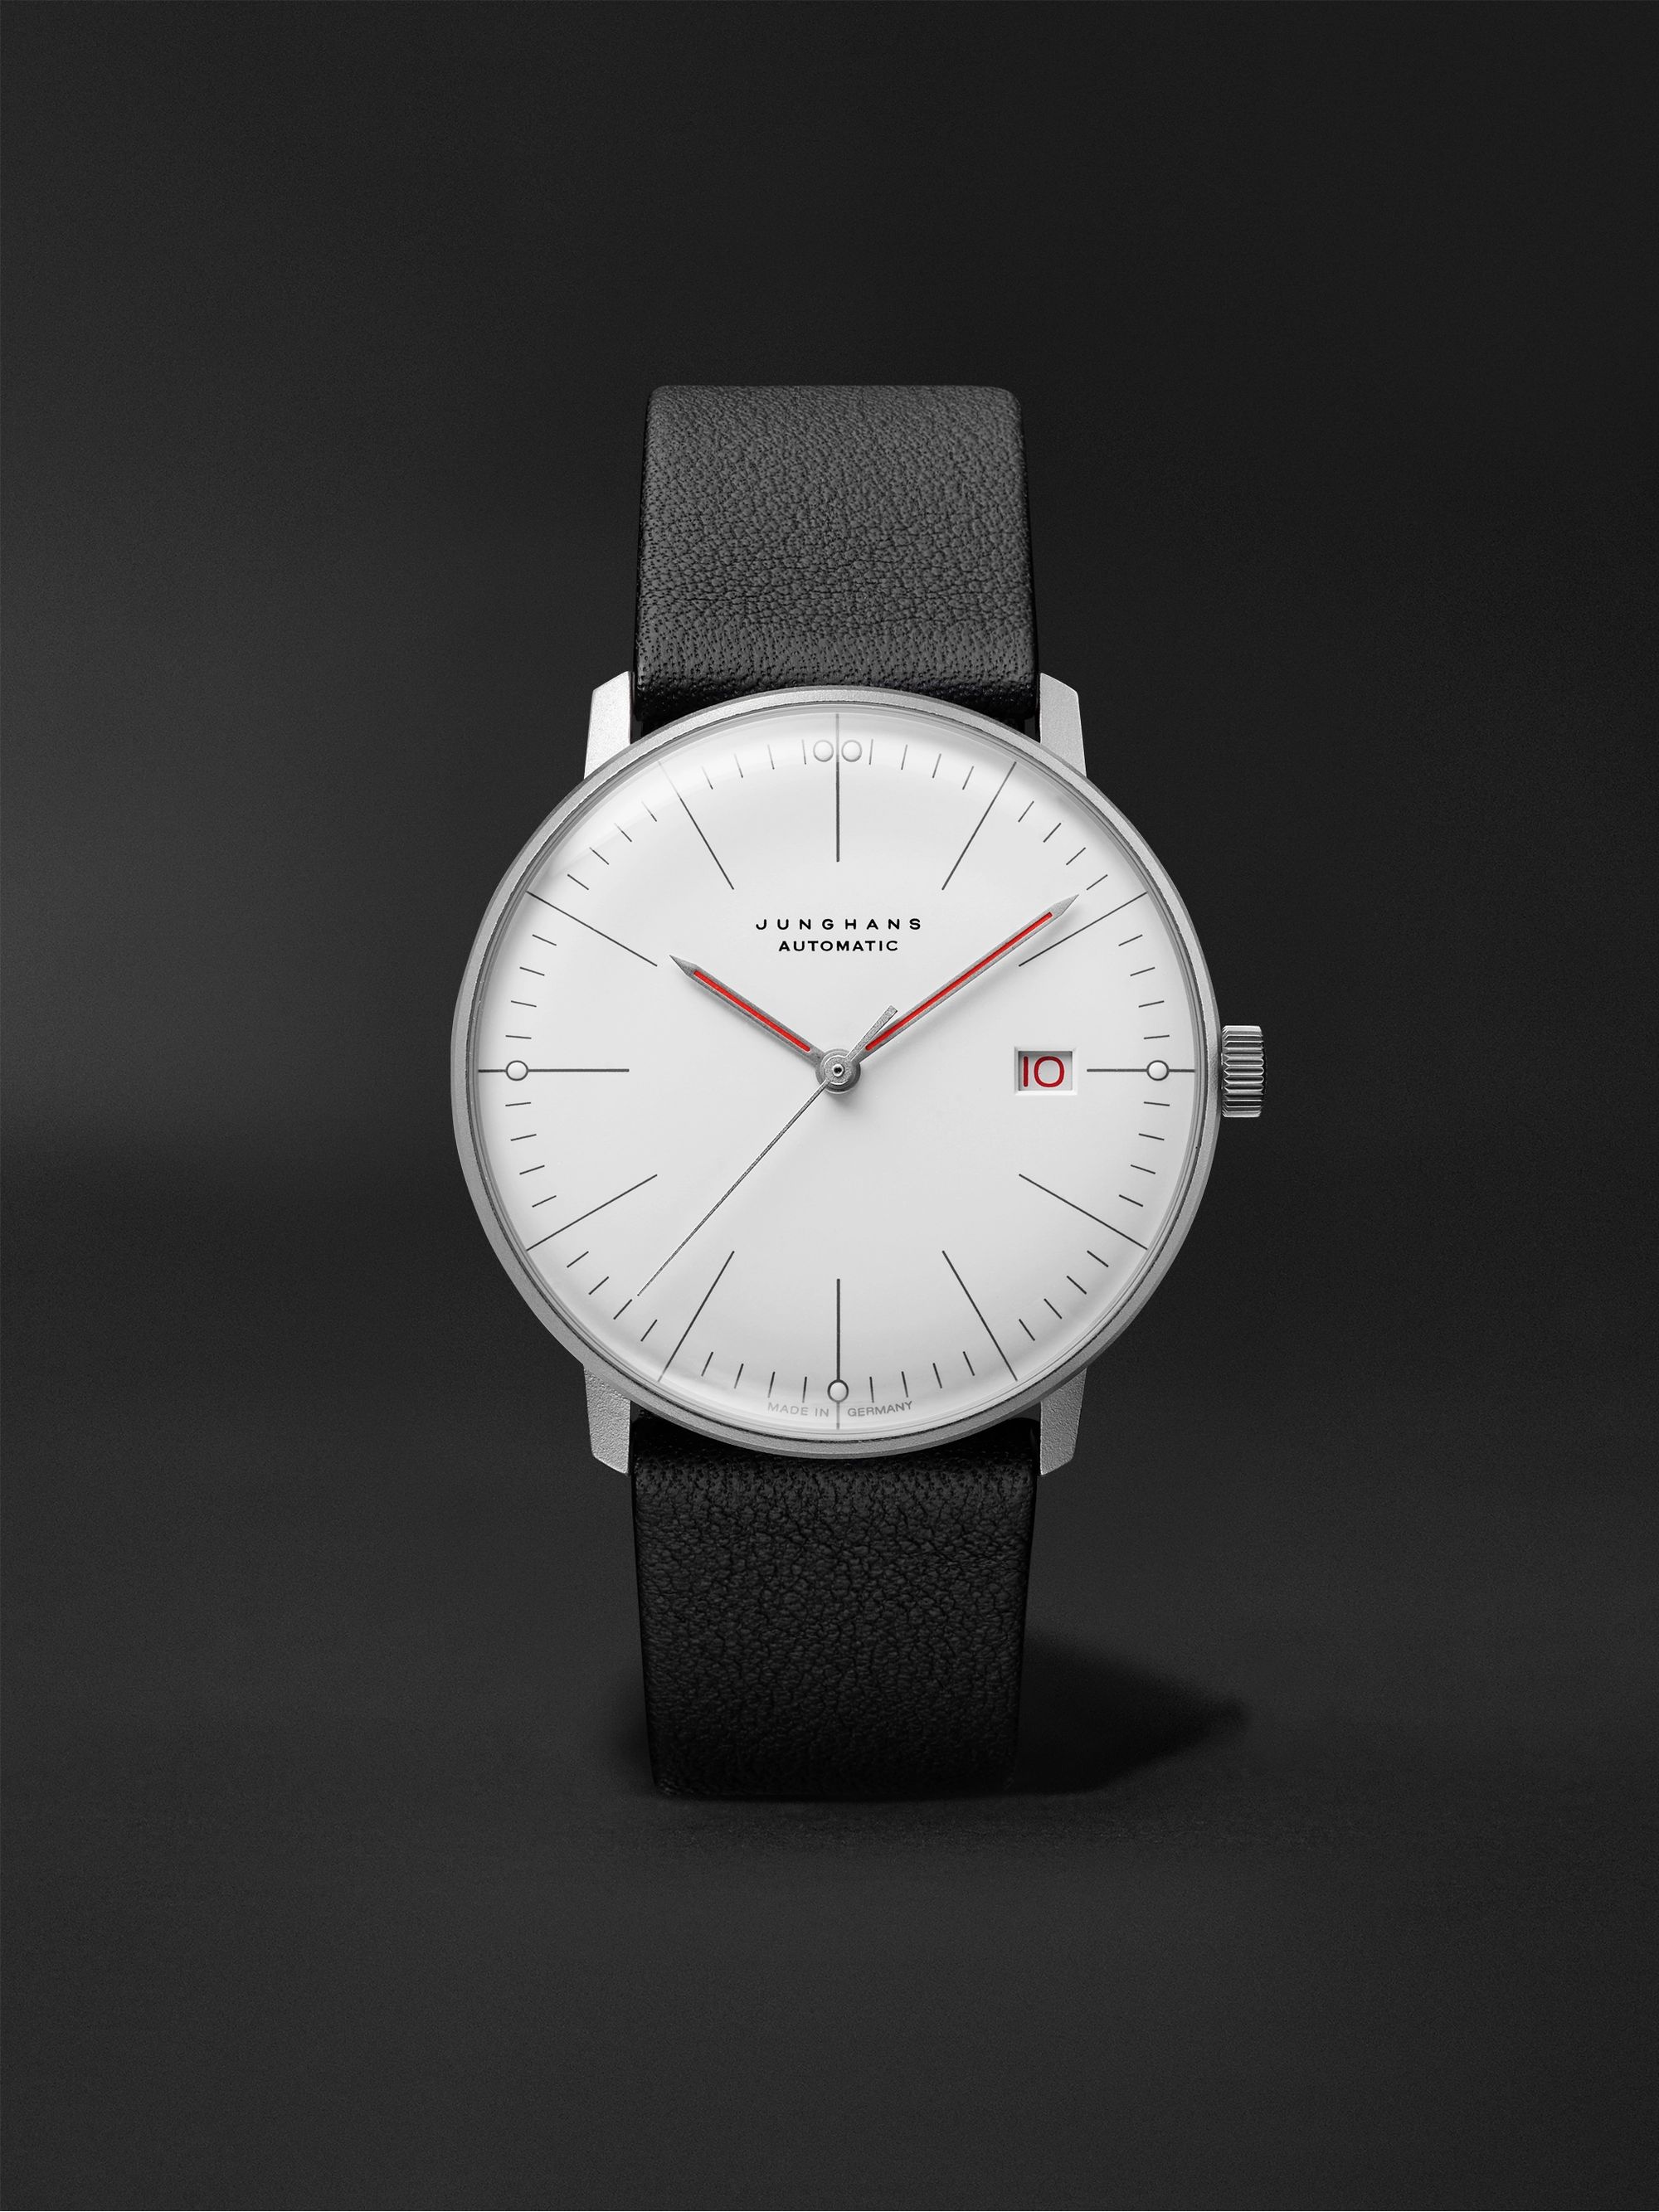 JUNGHANS Max Bill Bauhaus Automatic 38mm Stainless Steel and Textured-Leather Watch, Ref. No. 027/4009.02